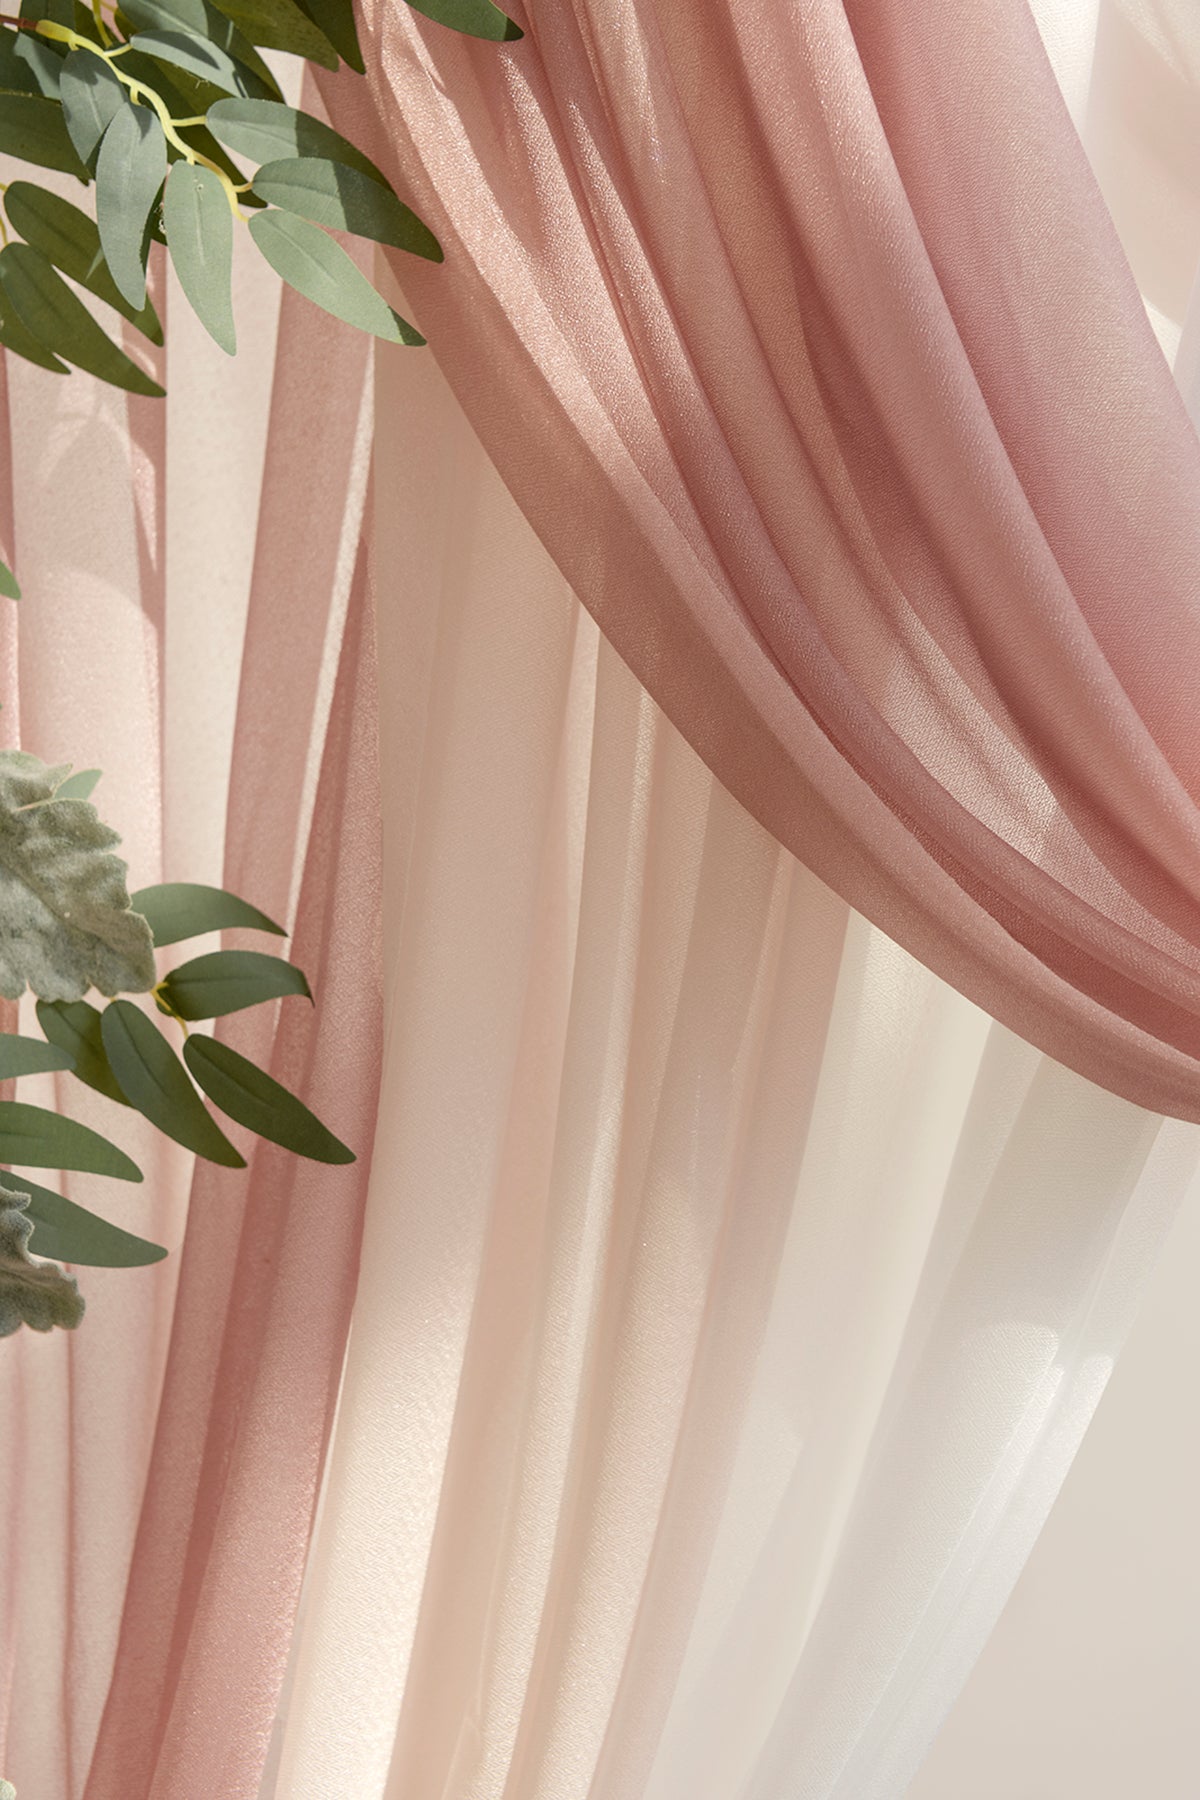 Flower Arch Decor with Drapes in Dusty Rose & Cream